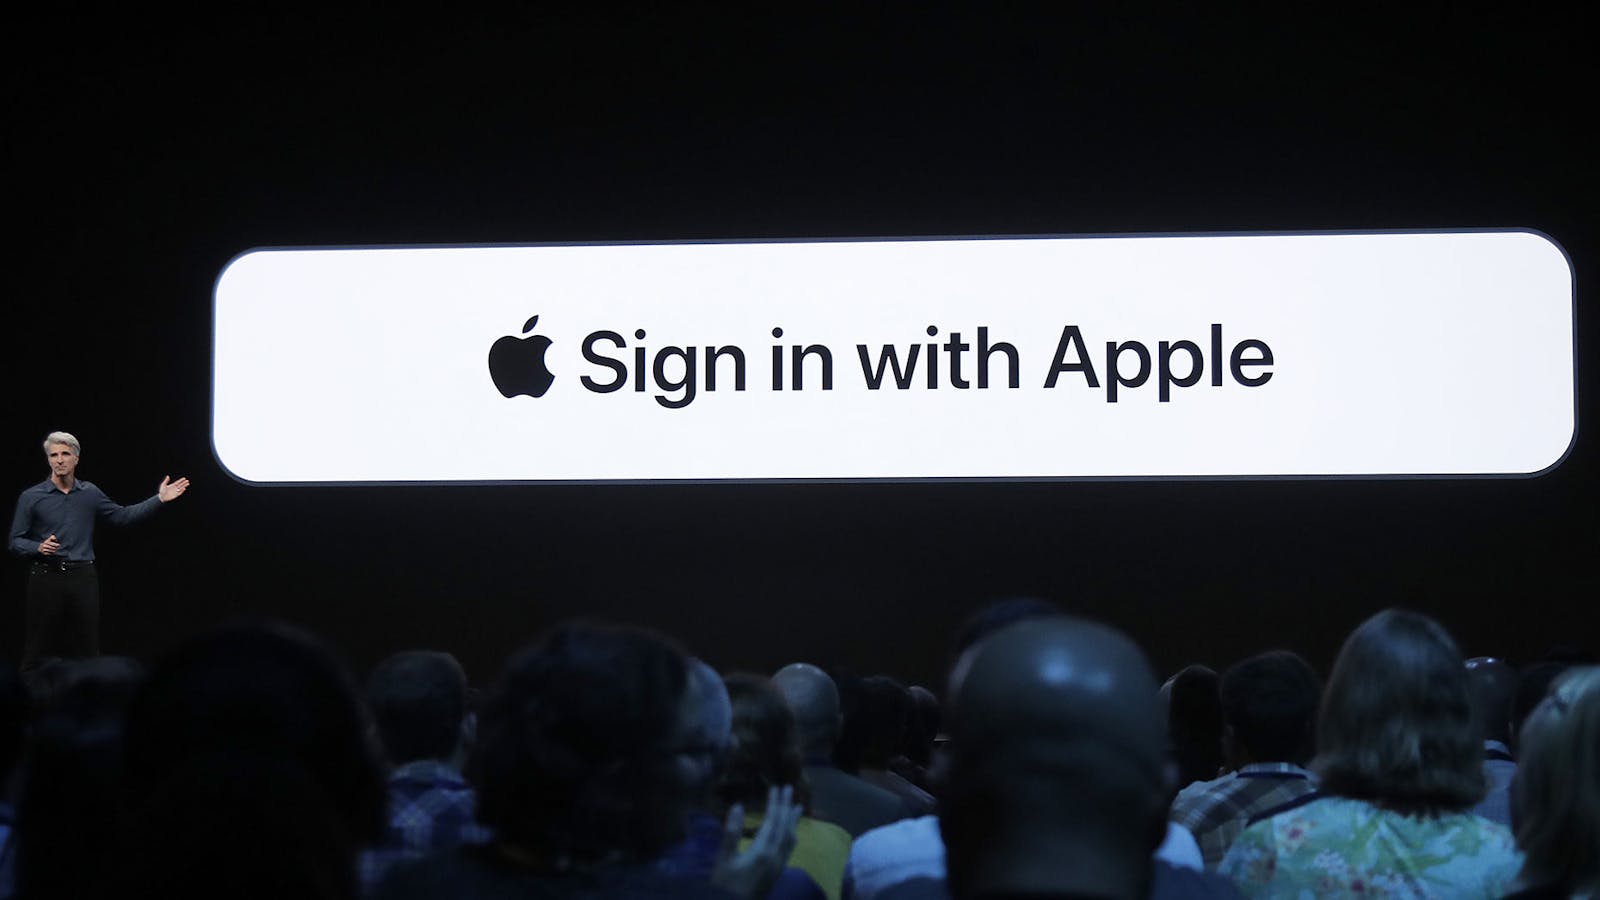 Craig Federighi, Apple's senior vice president of software engineering, unveils Apple's sign-in button in 2019. Photo by AP.